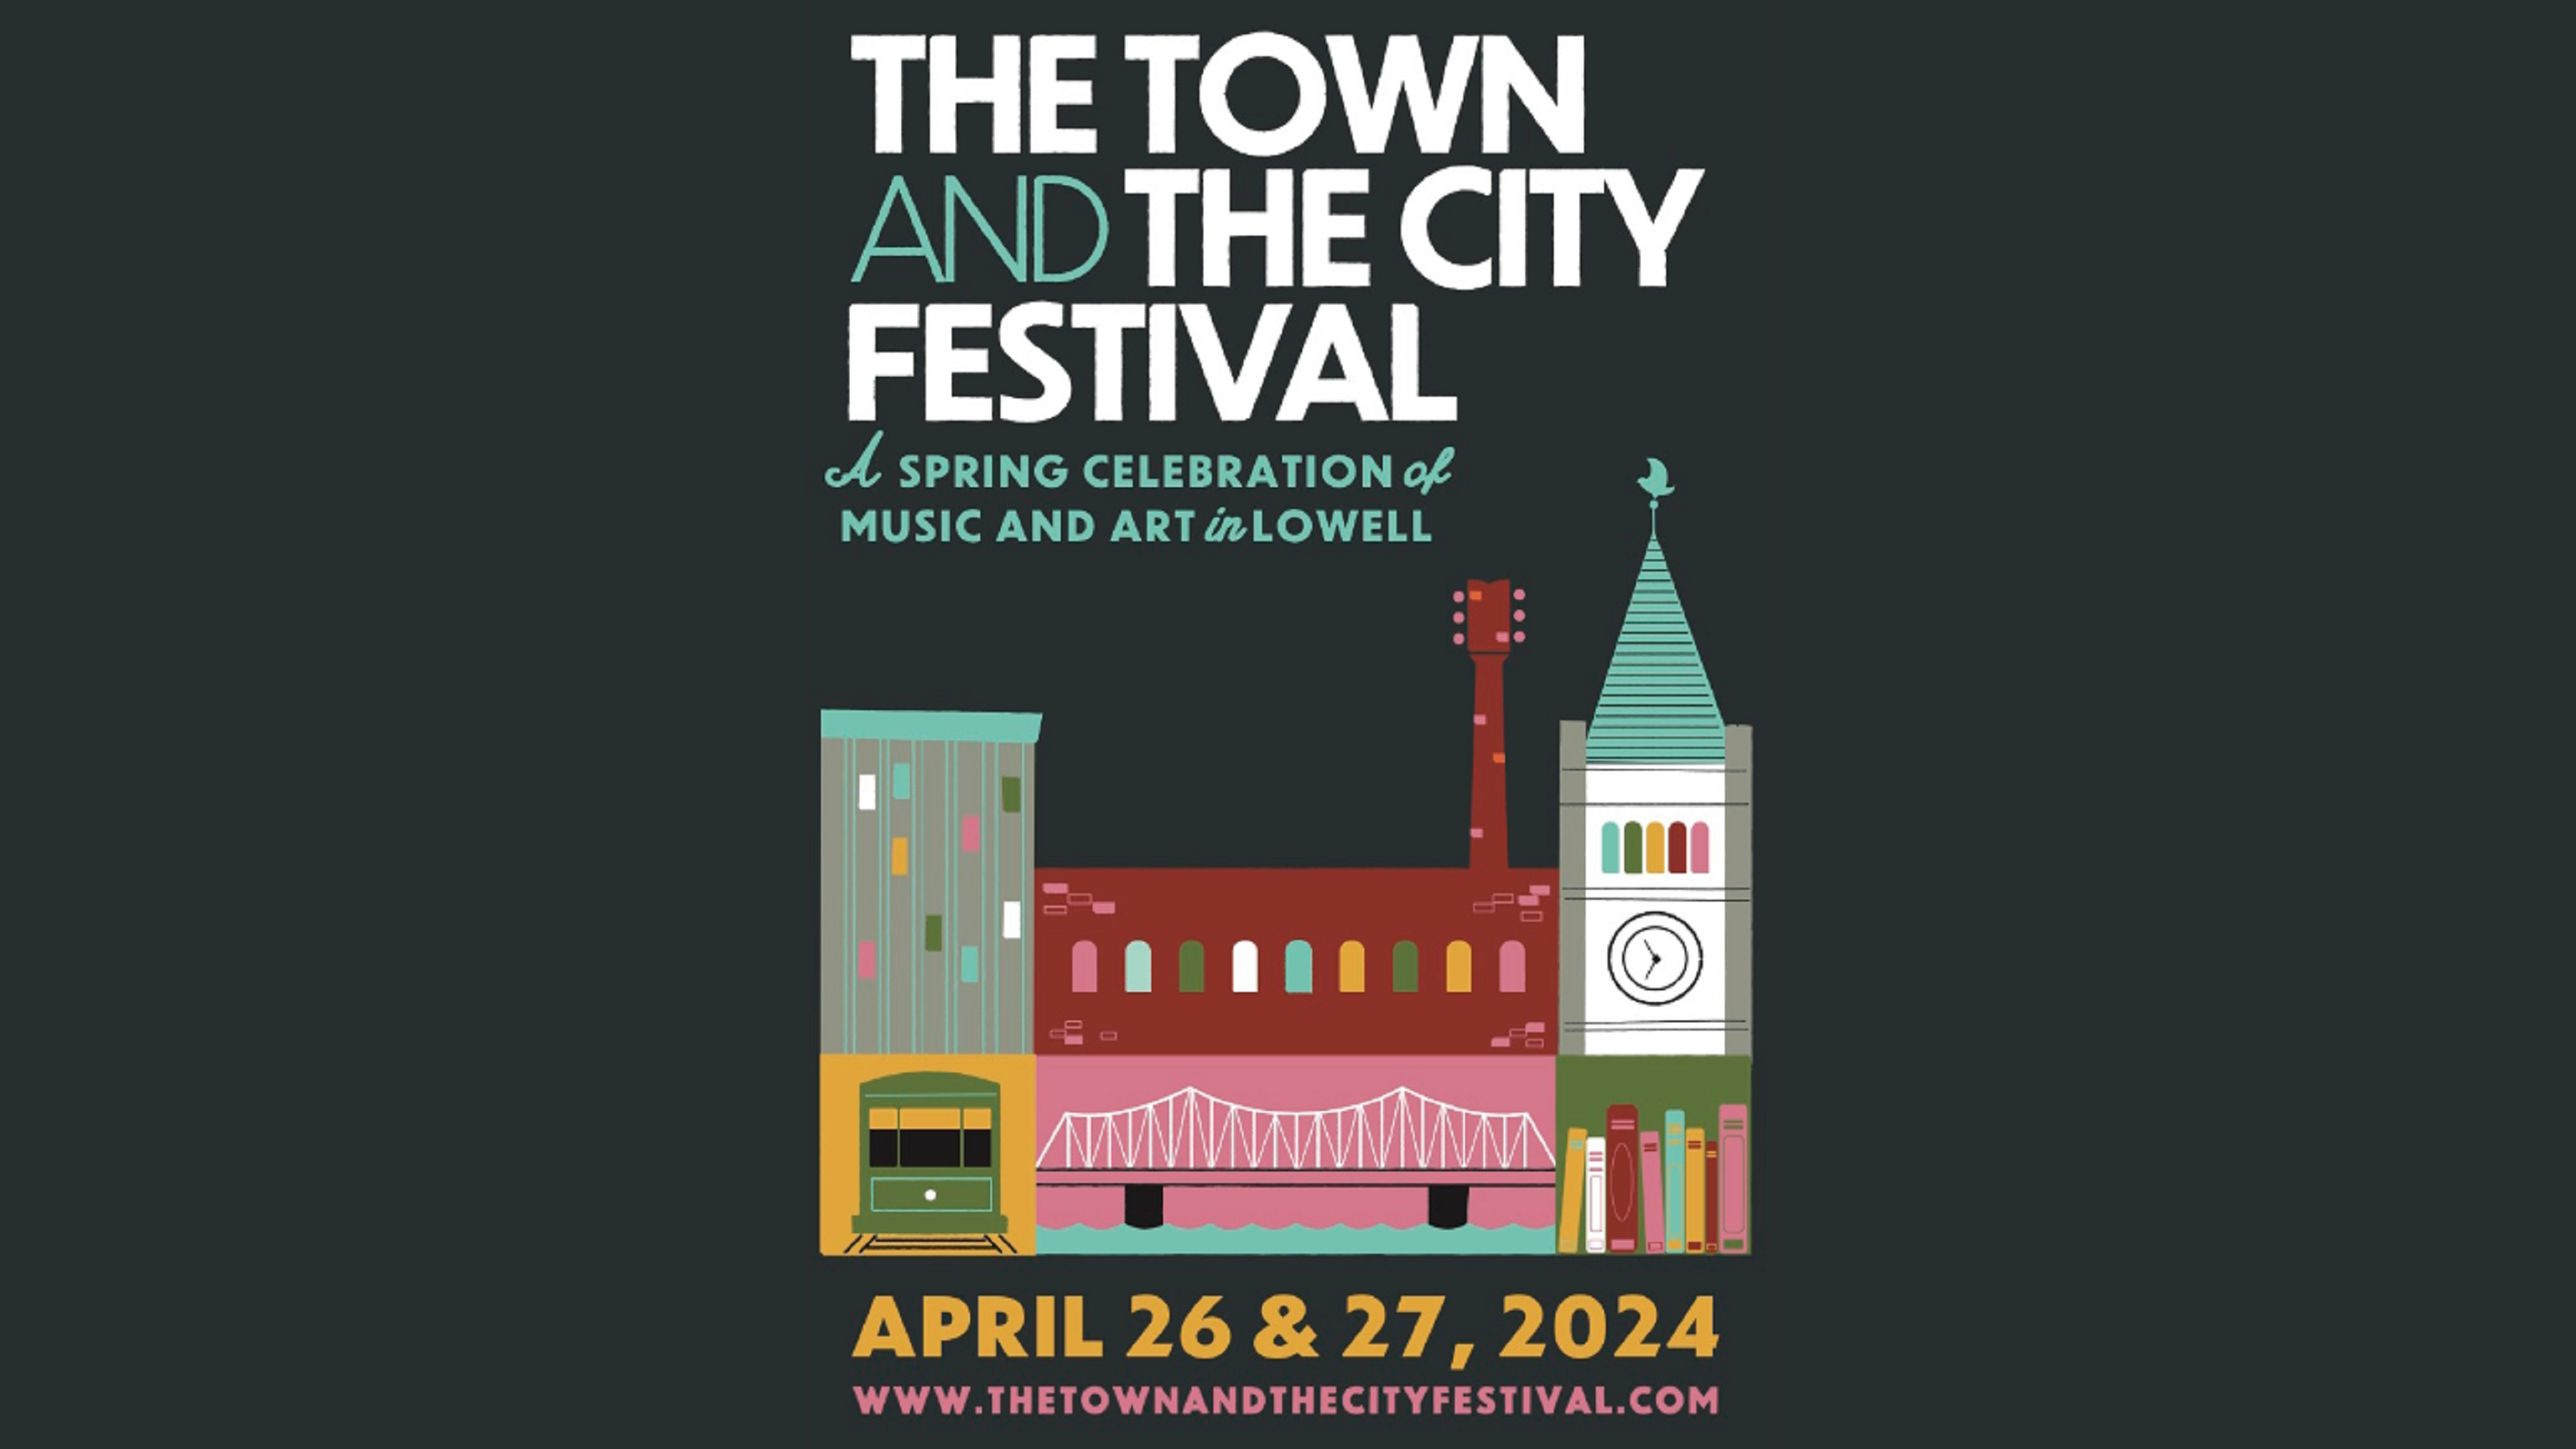 THE TOWN AND THE CITY FESTIVAL 2024 ANNOUNCES INITIAL PERFORMER LINEUP AND PARTICIPATING VENUES